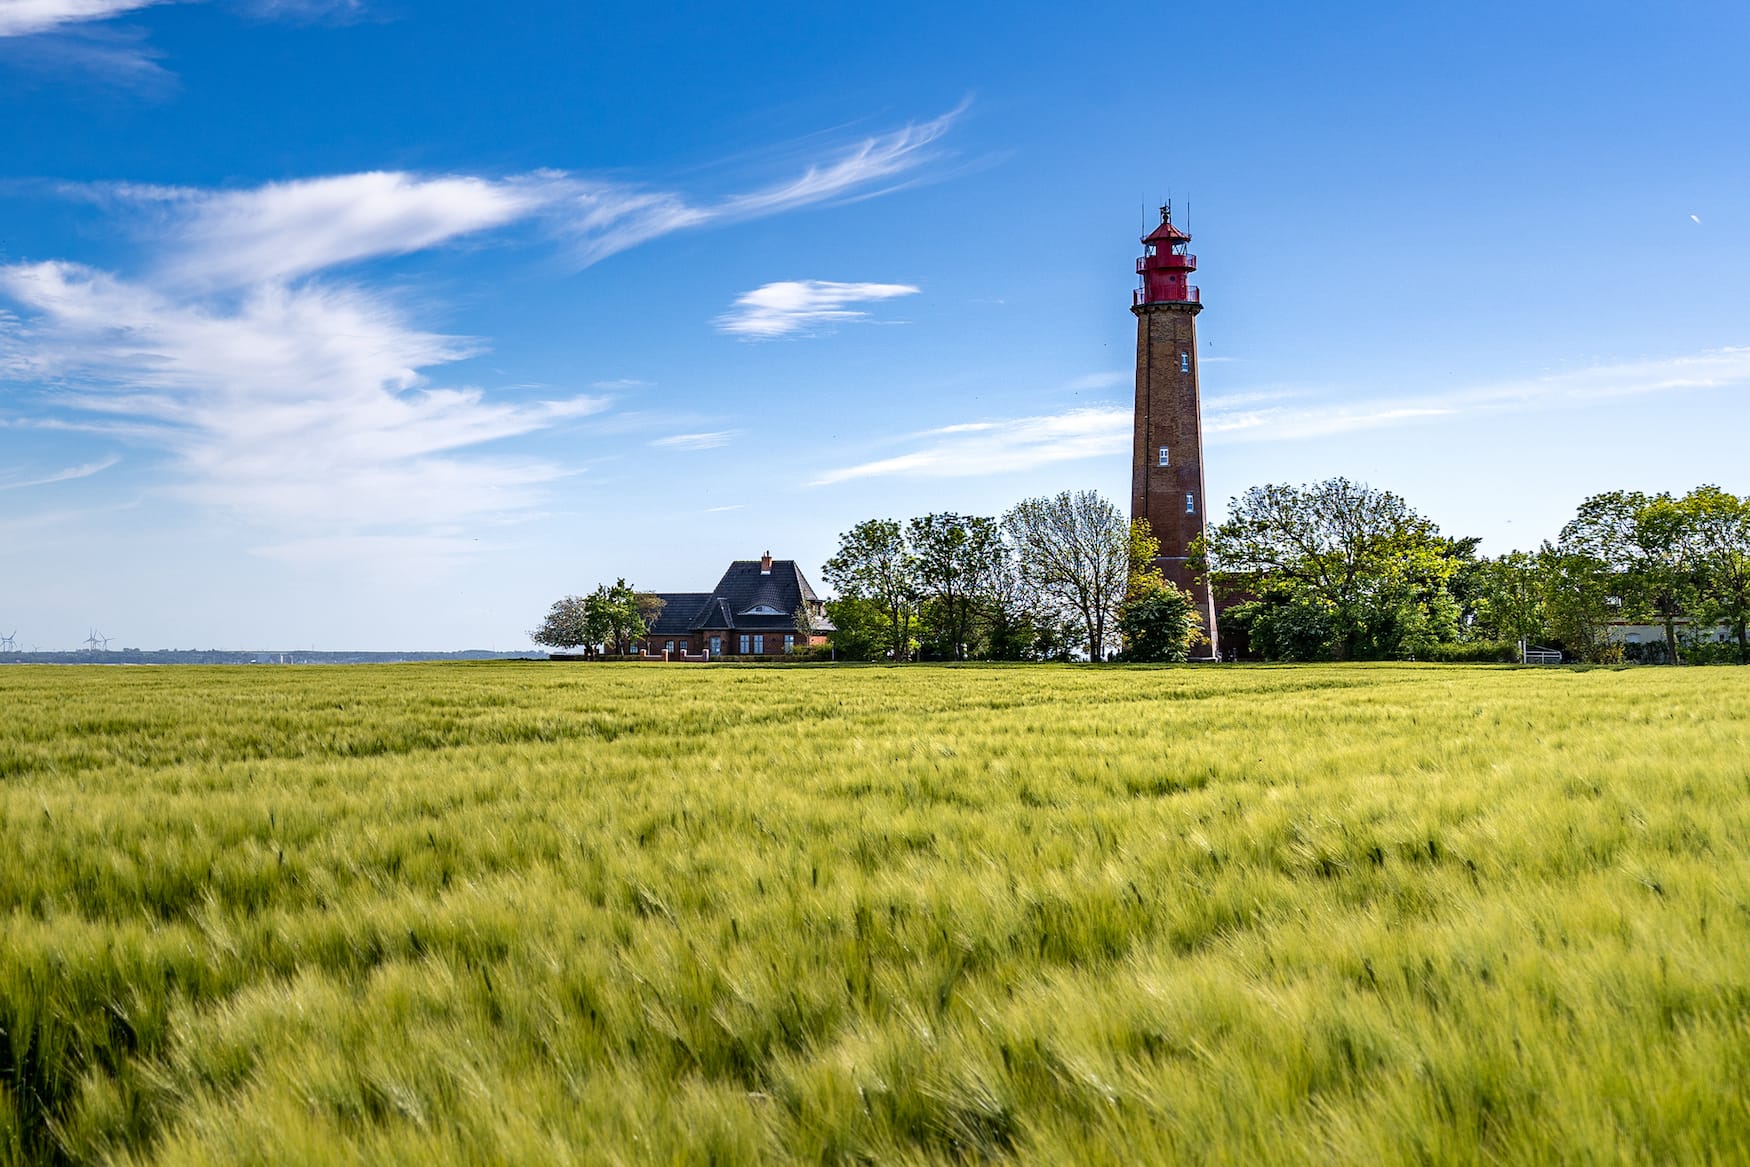 The beautiful Lighthouse On The Isle Of Fehmarn at the Baltic Sea in Germany.